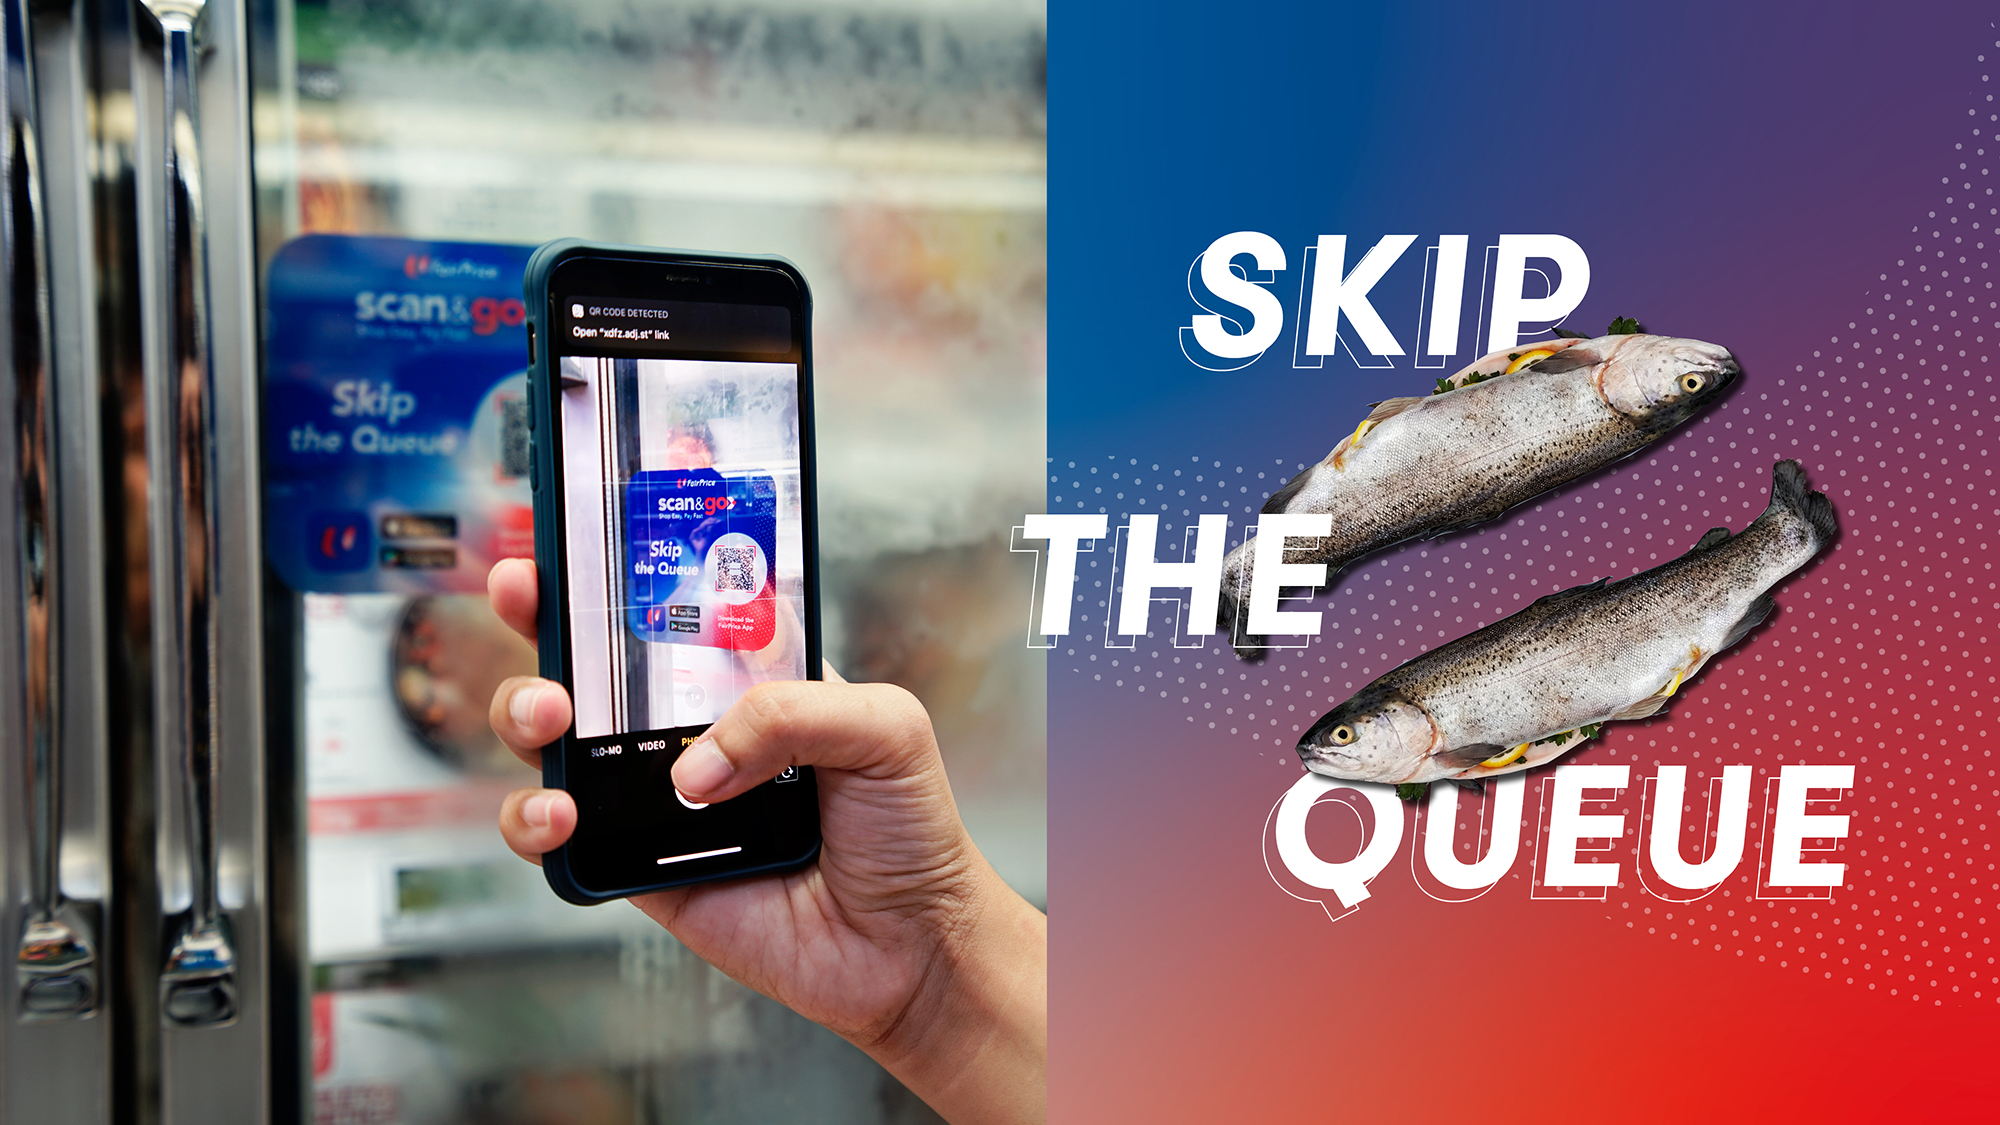 OuterEdit_NTUC_Scan & Go_Branding